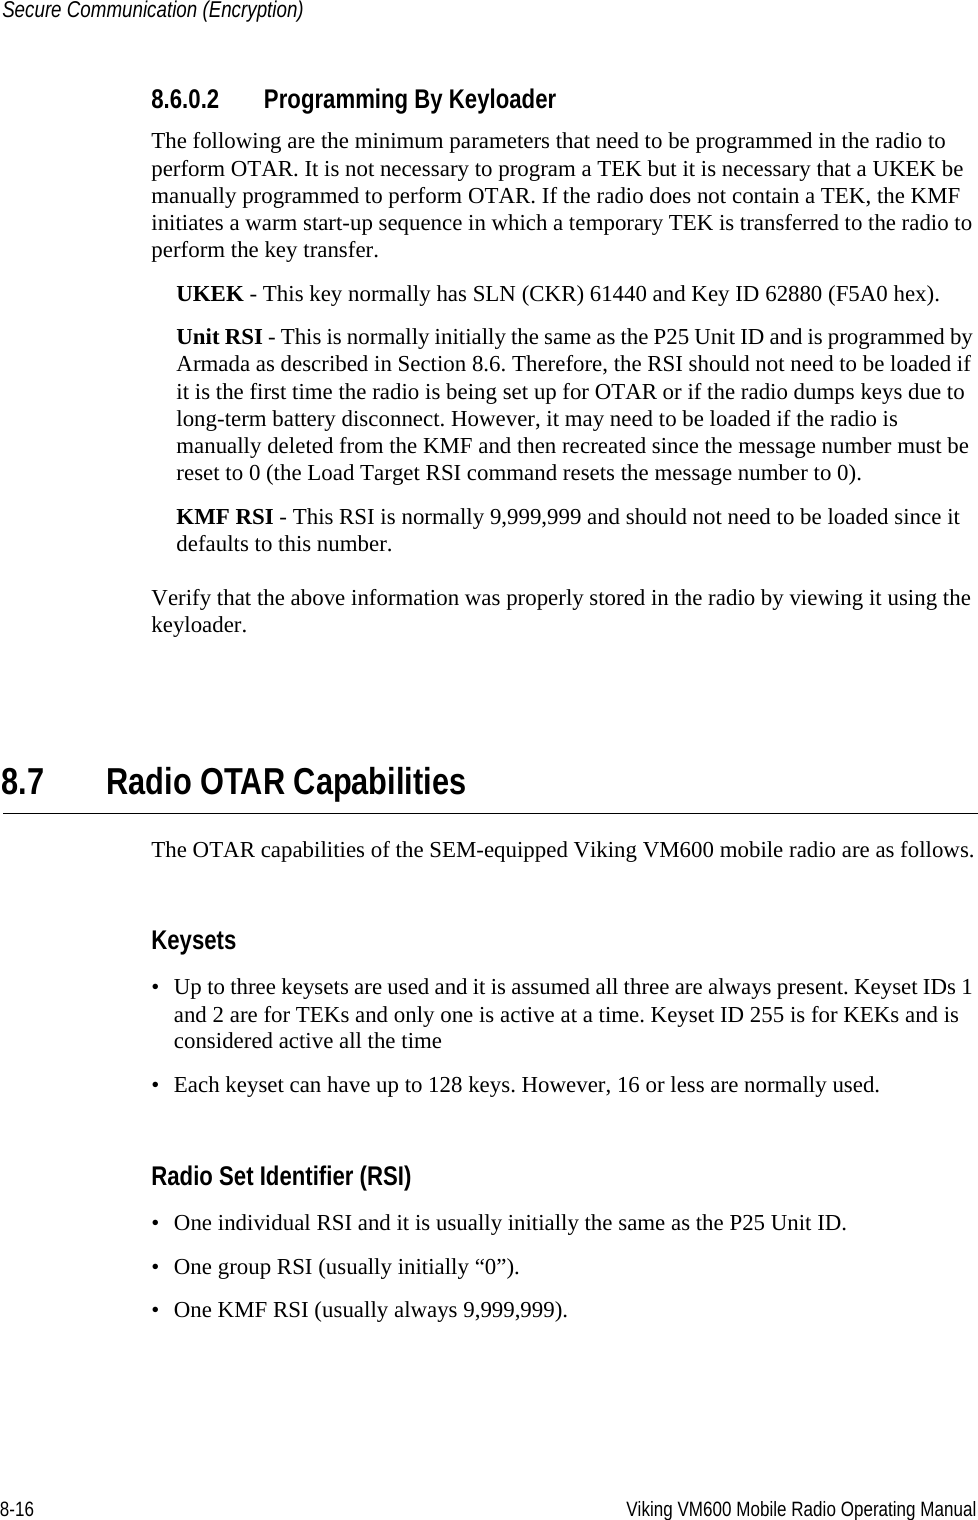 8-16 Viking VM600 Mobile Radio Operating ManualSecure Communication (Encryption)8.6.0.2 Programming By KeyloaderThe following are the minimum parameters that need to be programmed in the radio to perform OTAR. It is not necessary to program a TEK but it is necessary that a UKEK be manually programmed to perform OTAR. If the radio does not contain a TEK, the KMF initiates a warm start-up sequence in which a temporary TEK is transferred to the radio to perform the key transfer.UKEK - This key normally has SLN (CKR) 61440 and Key ID 62880 (F5A0 hex). Unit RSI - This is normally initially the same as the P25 Unit ID and is programmed by Armada as described in Section 8.6. Therefore, the RSI should not need to be loaded if it is the first time the radio is being set up for OTAR or if the radio dumps keys due to long-term battery disconnect. However, it may need to be loaded if the radio is manually deleted from the KMF and then recreated since the message number must be reset to 0 (the Load Target RSI command resets the message number to 0).KMF RSI - This RSI is normally 9,999,999 and should not need to be loaded since it defaults to this number. Verify that the above information was properly stored in the radio by viewing it using the keyloader.8.7 Radio OTAR CapabilitiesThe OTAR capabilities of the SEM-equipped Viking VM600 mobile radio are as follows.Keysets• Up to three keysets are used and it is assumed all three are always present. Keyset IDs 1 and 2 are for TEKs and only one is active at a time. Keyset ID 255 is for KEKs and is considered active all the time• Each keyset can have up to 128 keys. However, 16 or less are normally used. Radio Set Identifier (RSI)• One individual RSI and it is usually initially the same as the P25 Unit ID.• One group RSI (usually initially “0”).• One KMF RSI (usually always 9,999,999).Draft 4/29/2014